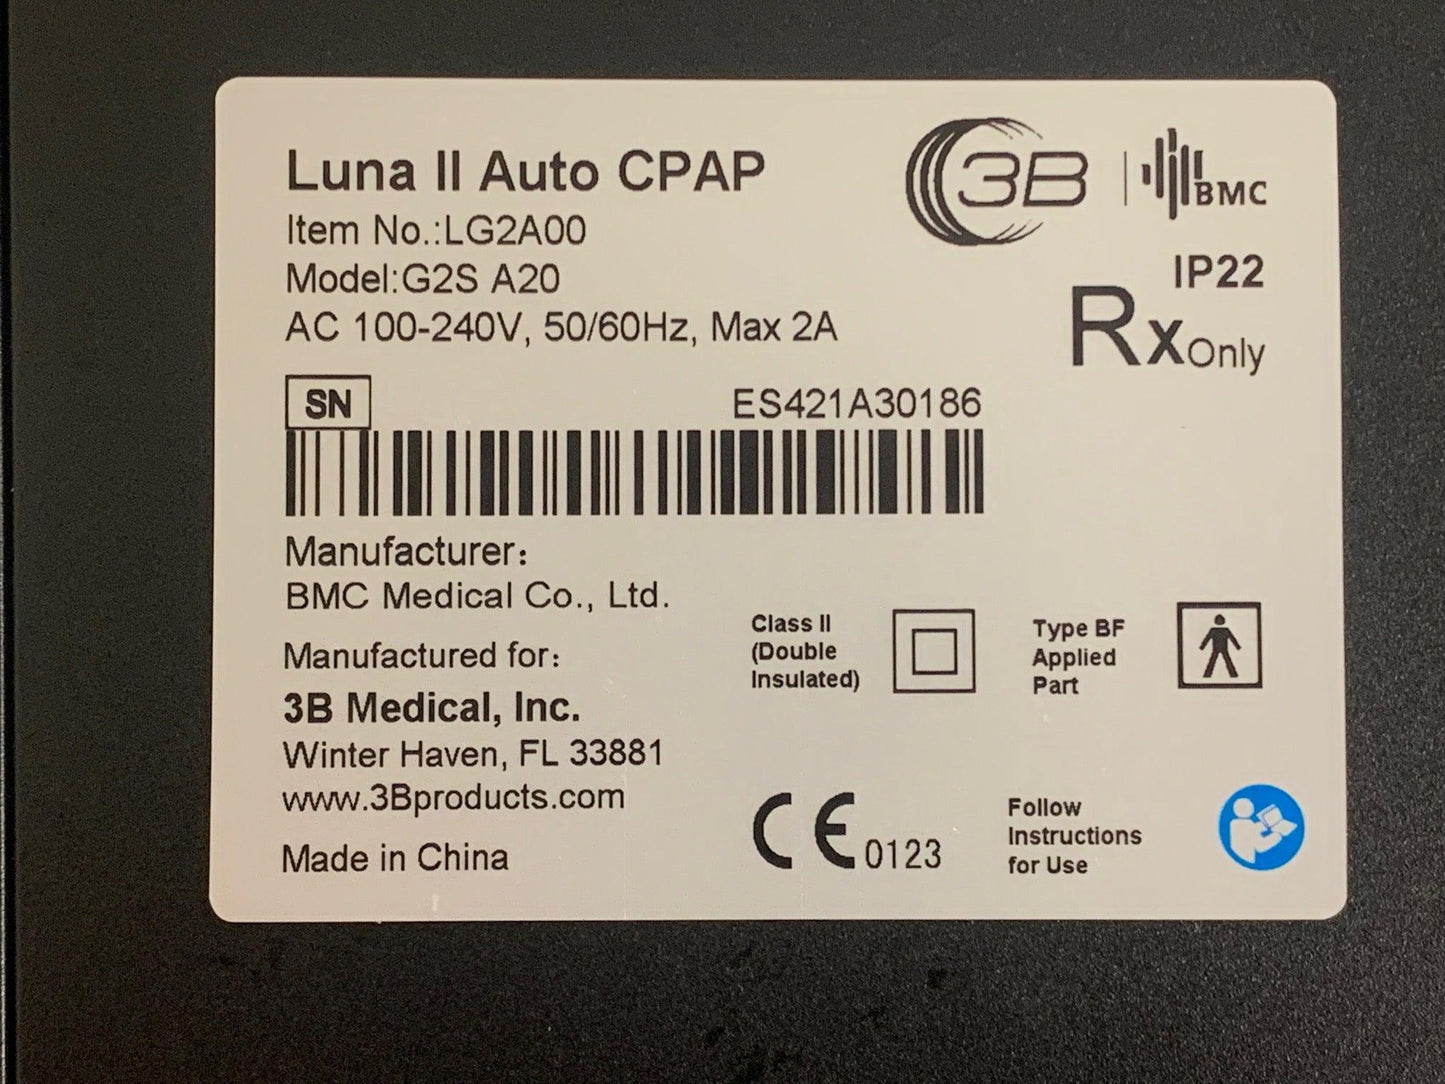 NEW 3B Medical Luna II Auto-CPAP Machine with Integrated Heated Humidifier LG2A00